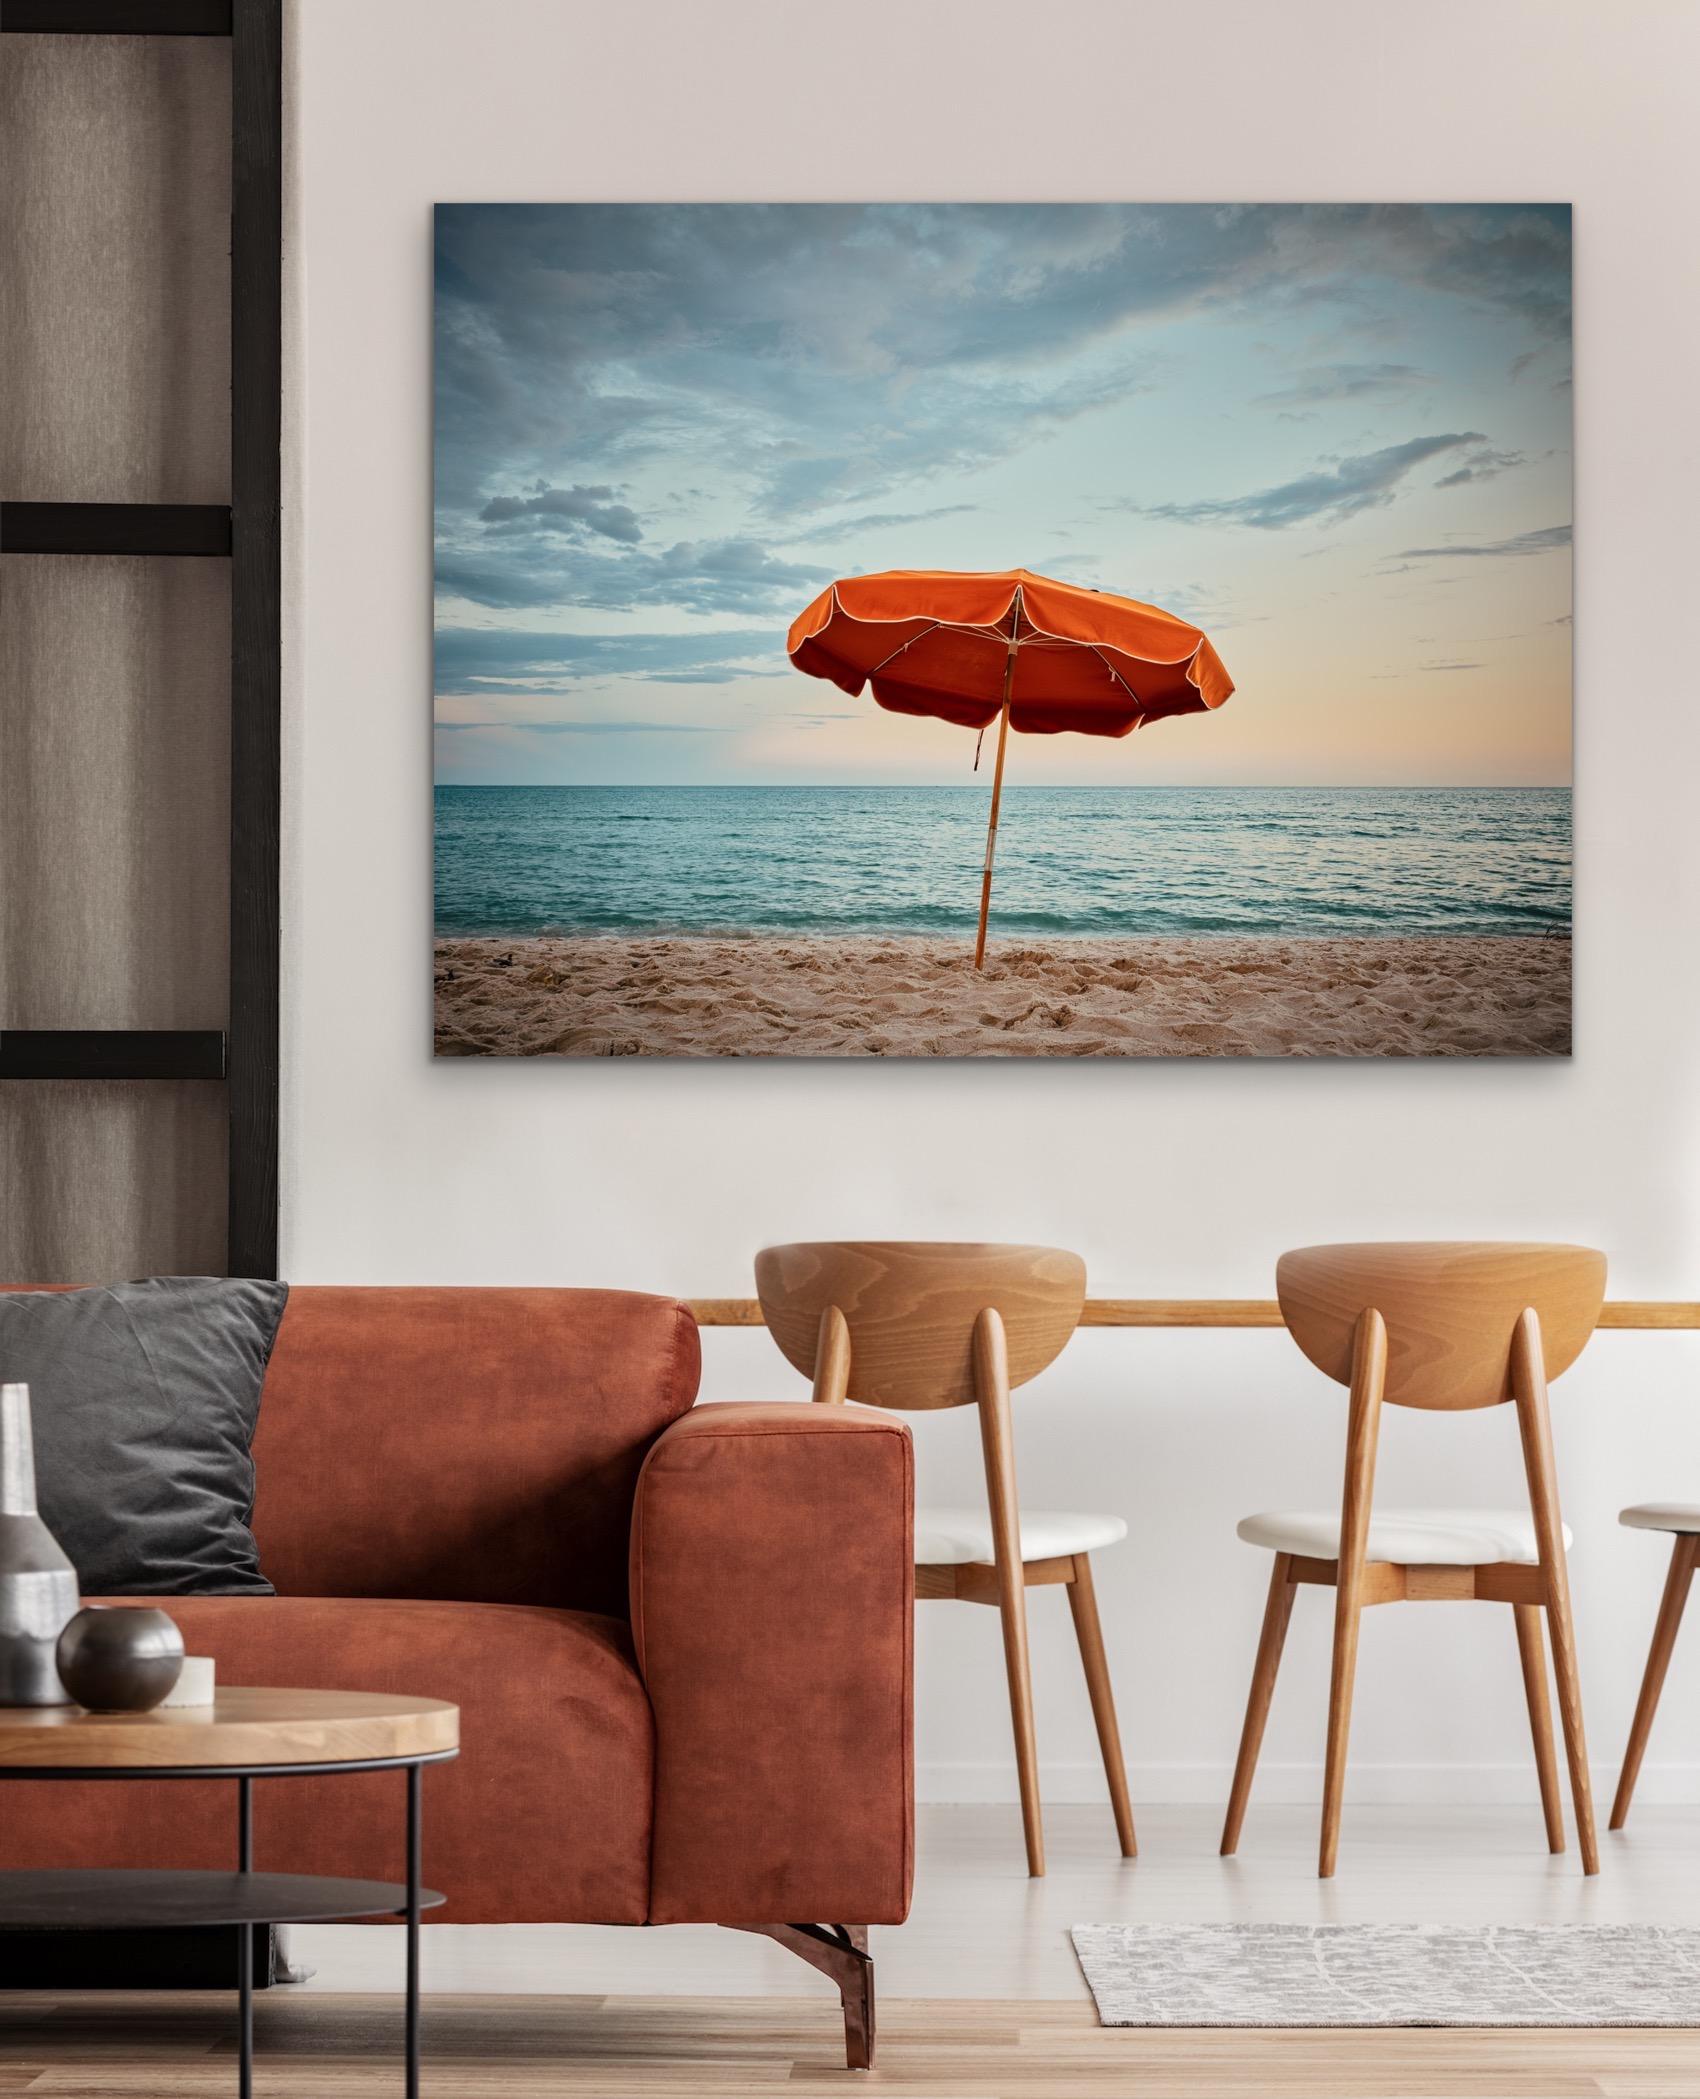 This contemporary coastal photograph by Peter Mendelson captures a vibrant orange beach umbrella planted in sand overlooking the ocean at Miami Beach in Florida. The blue sky has a subtle warm tone along the horizon, tying together the warm tones in